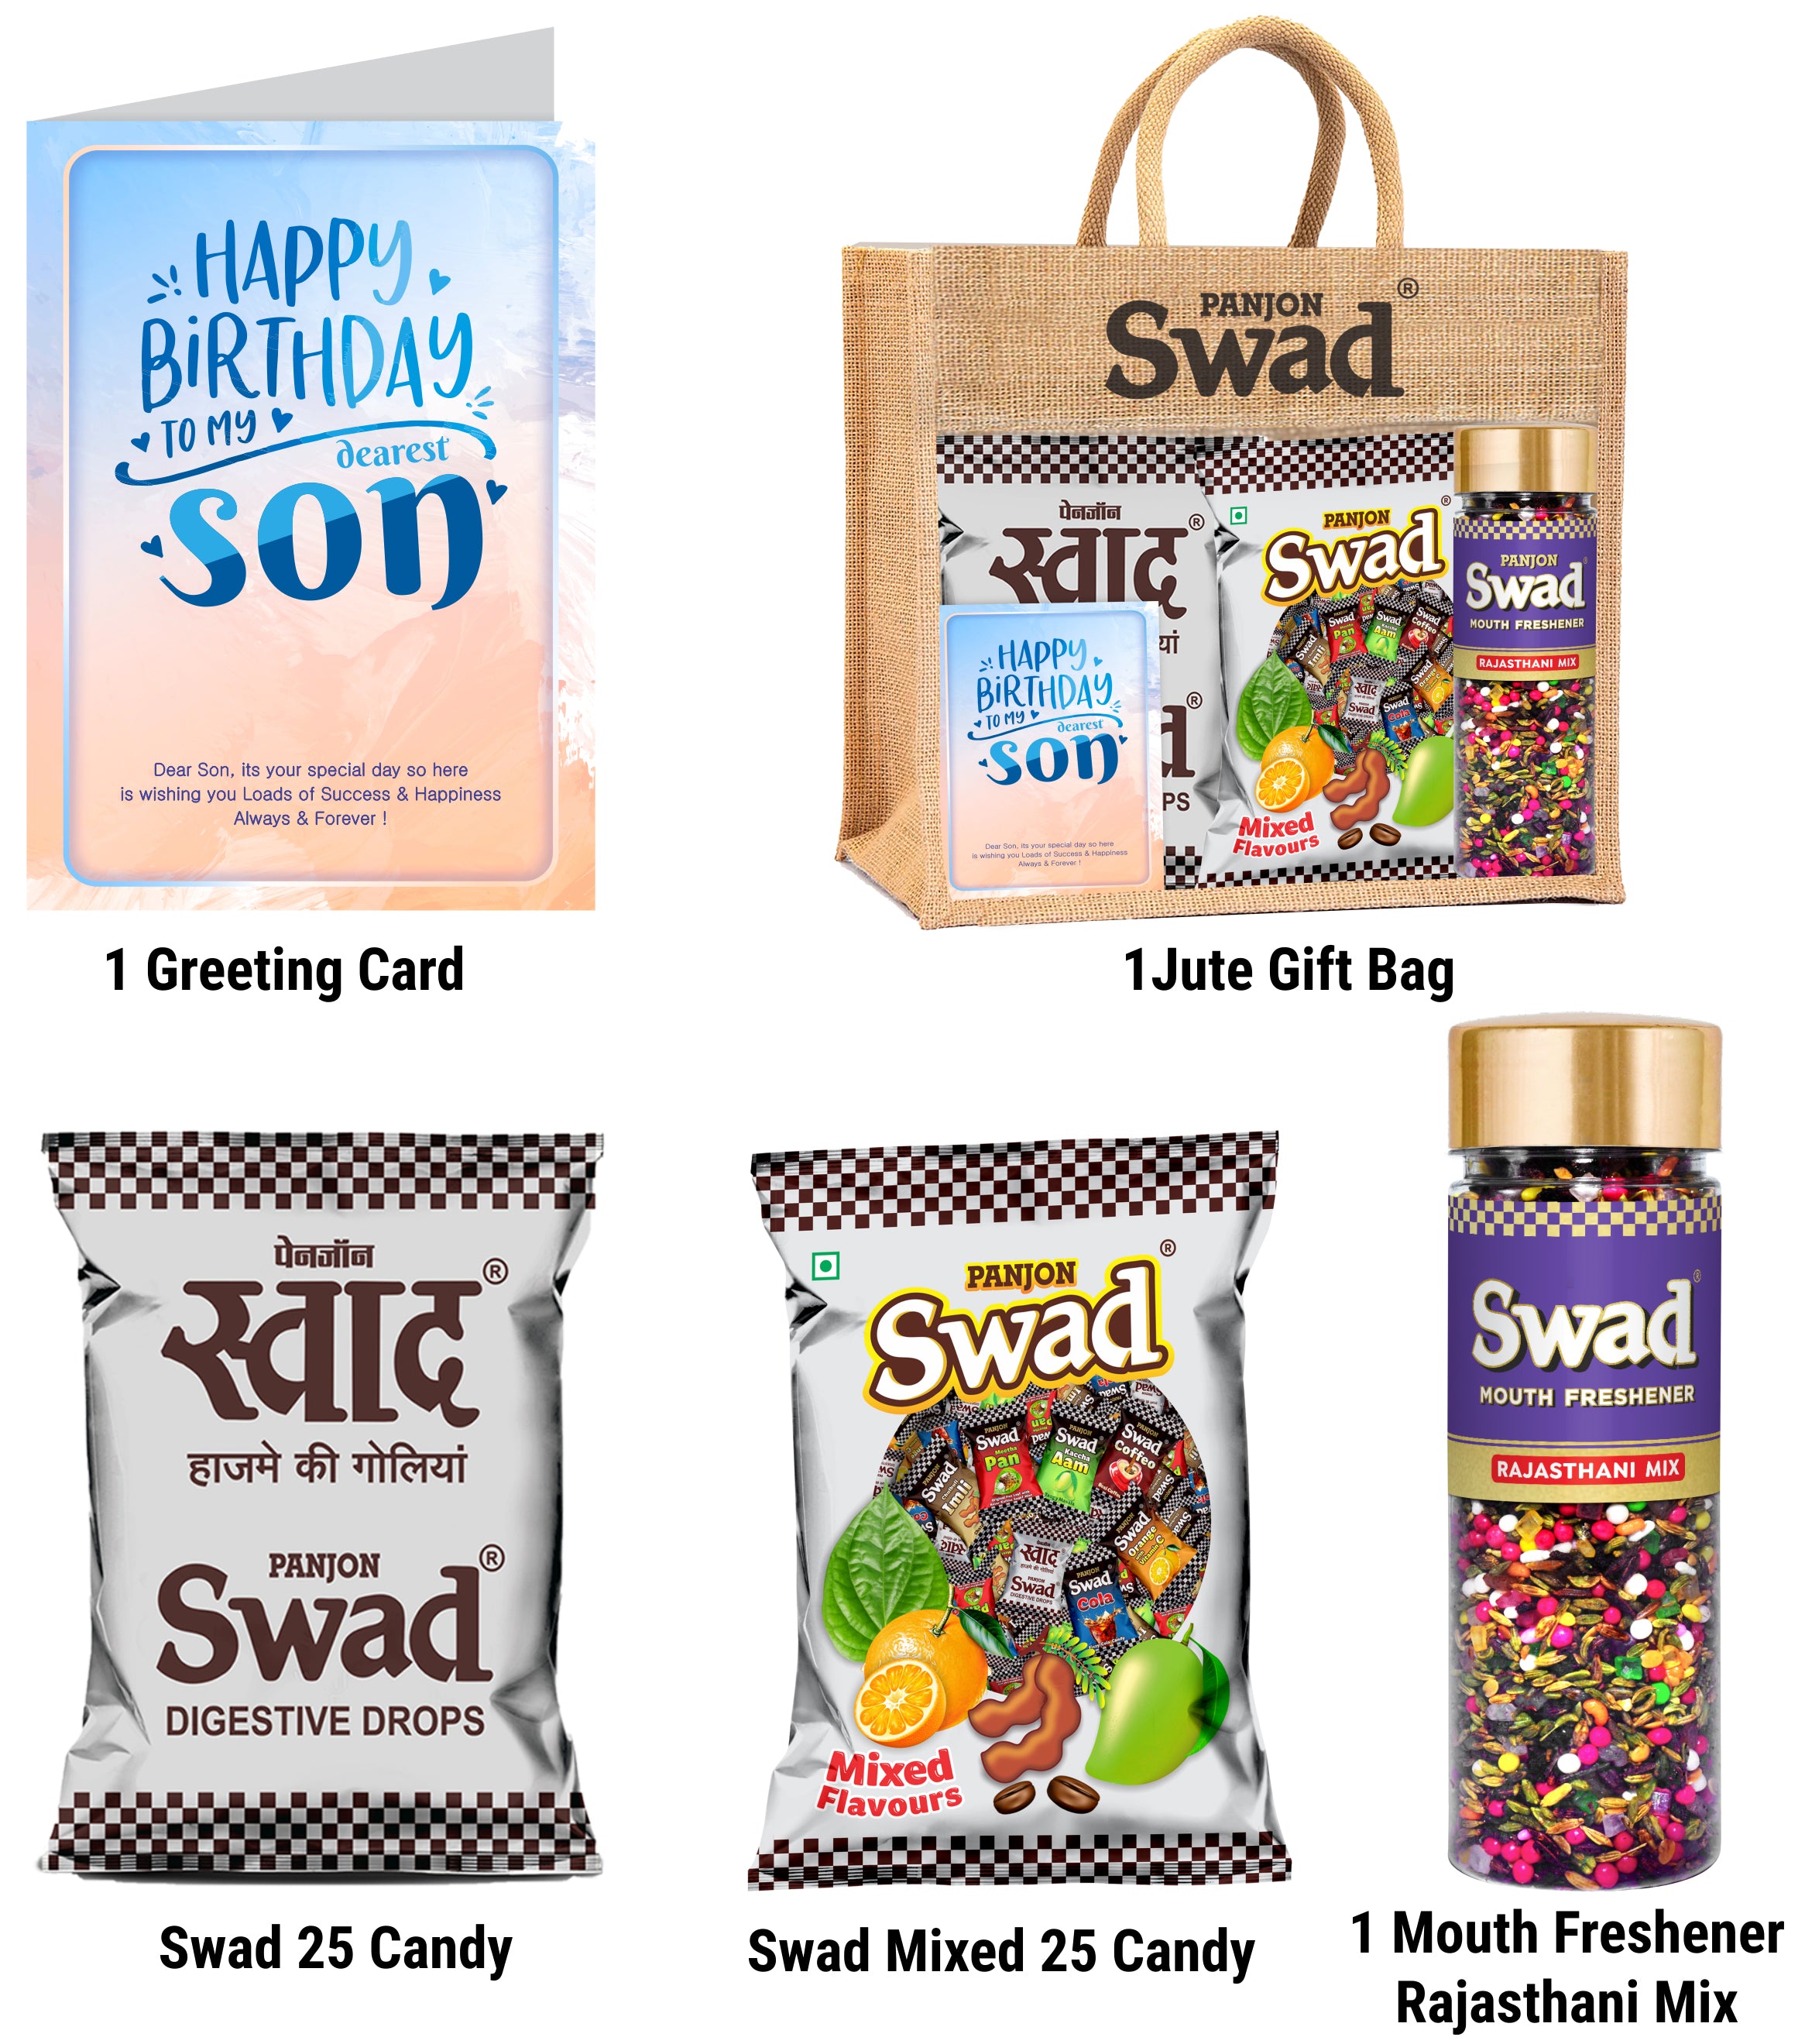 Swad Happy Birthday Gift for son/beta with Card (25 Swad Candy, 25 Mixed Toffee, Rajasthani Mix Mukhwas) in Jute Bag